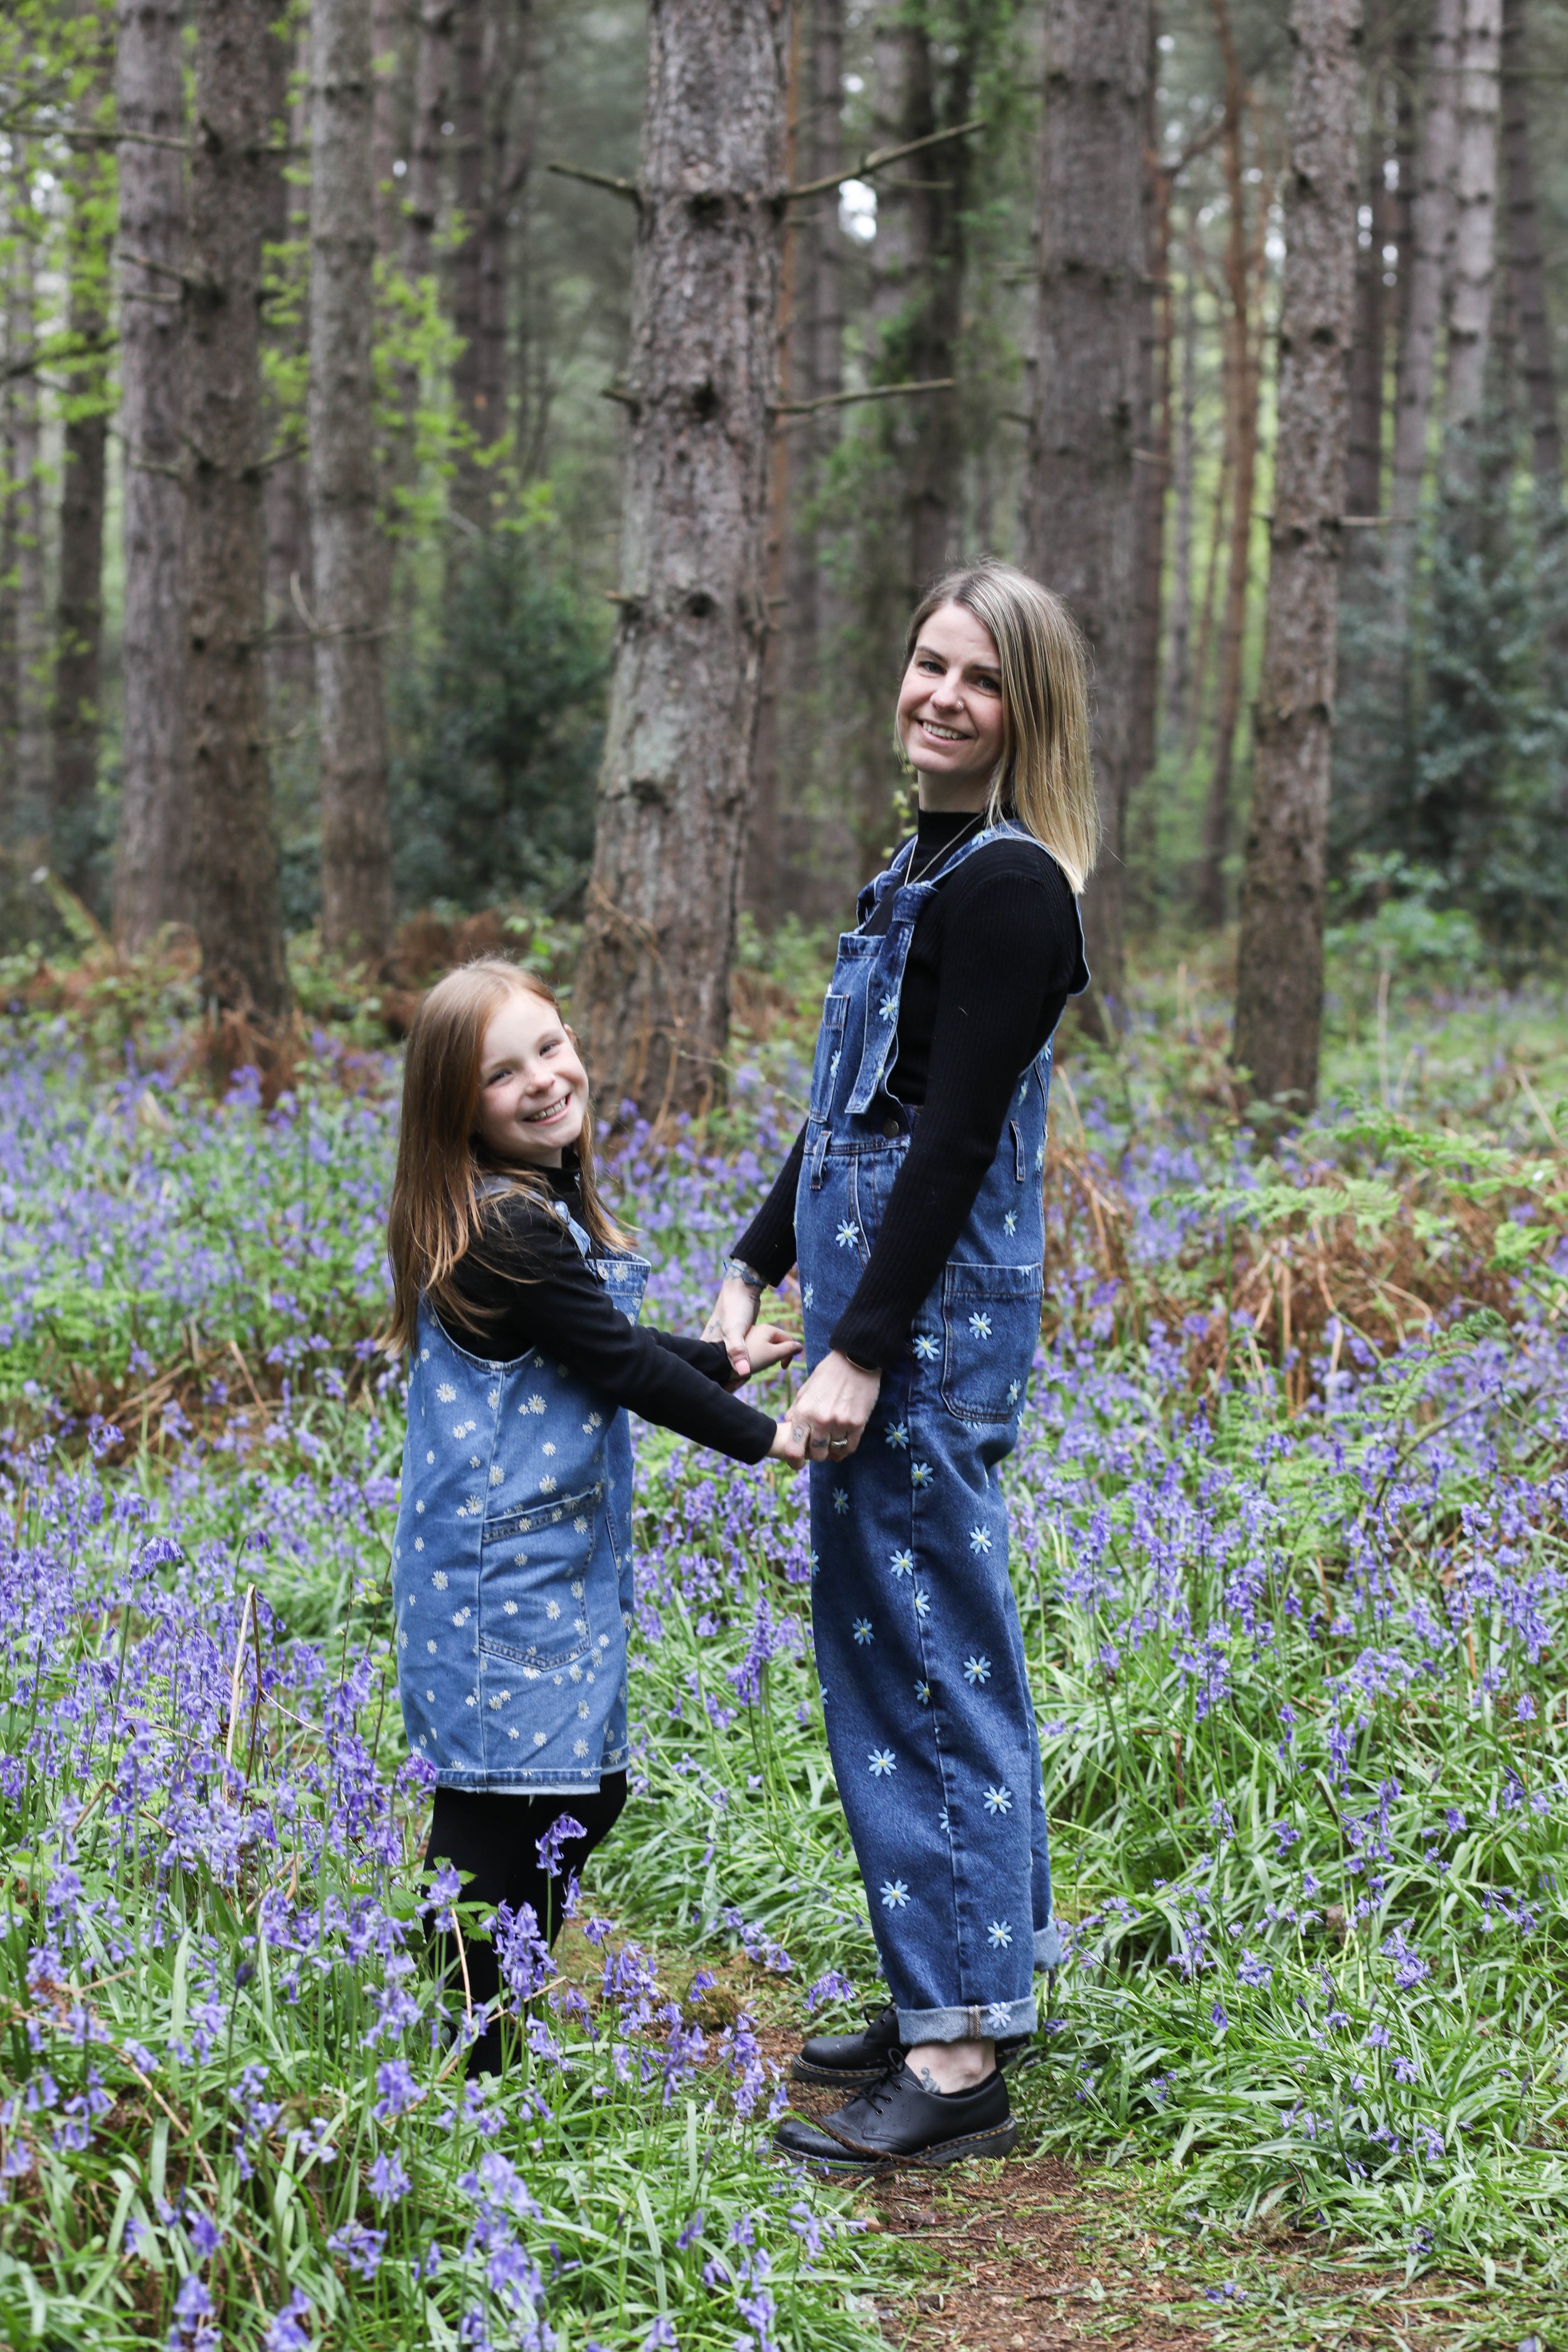 MUM AND DAUGHTER PHOTO SHOOT IN THE BLUEBELLS | BERKSHIRE PORTRAIT SHOOTS38 choice .JPG